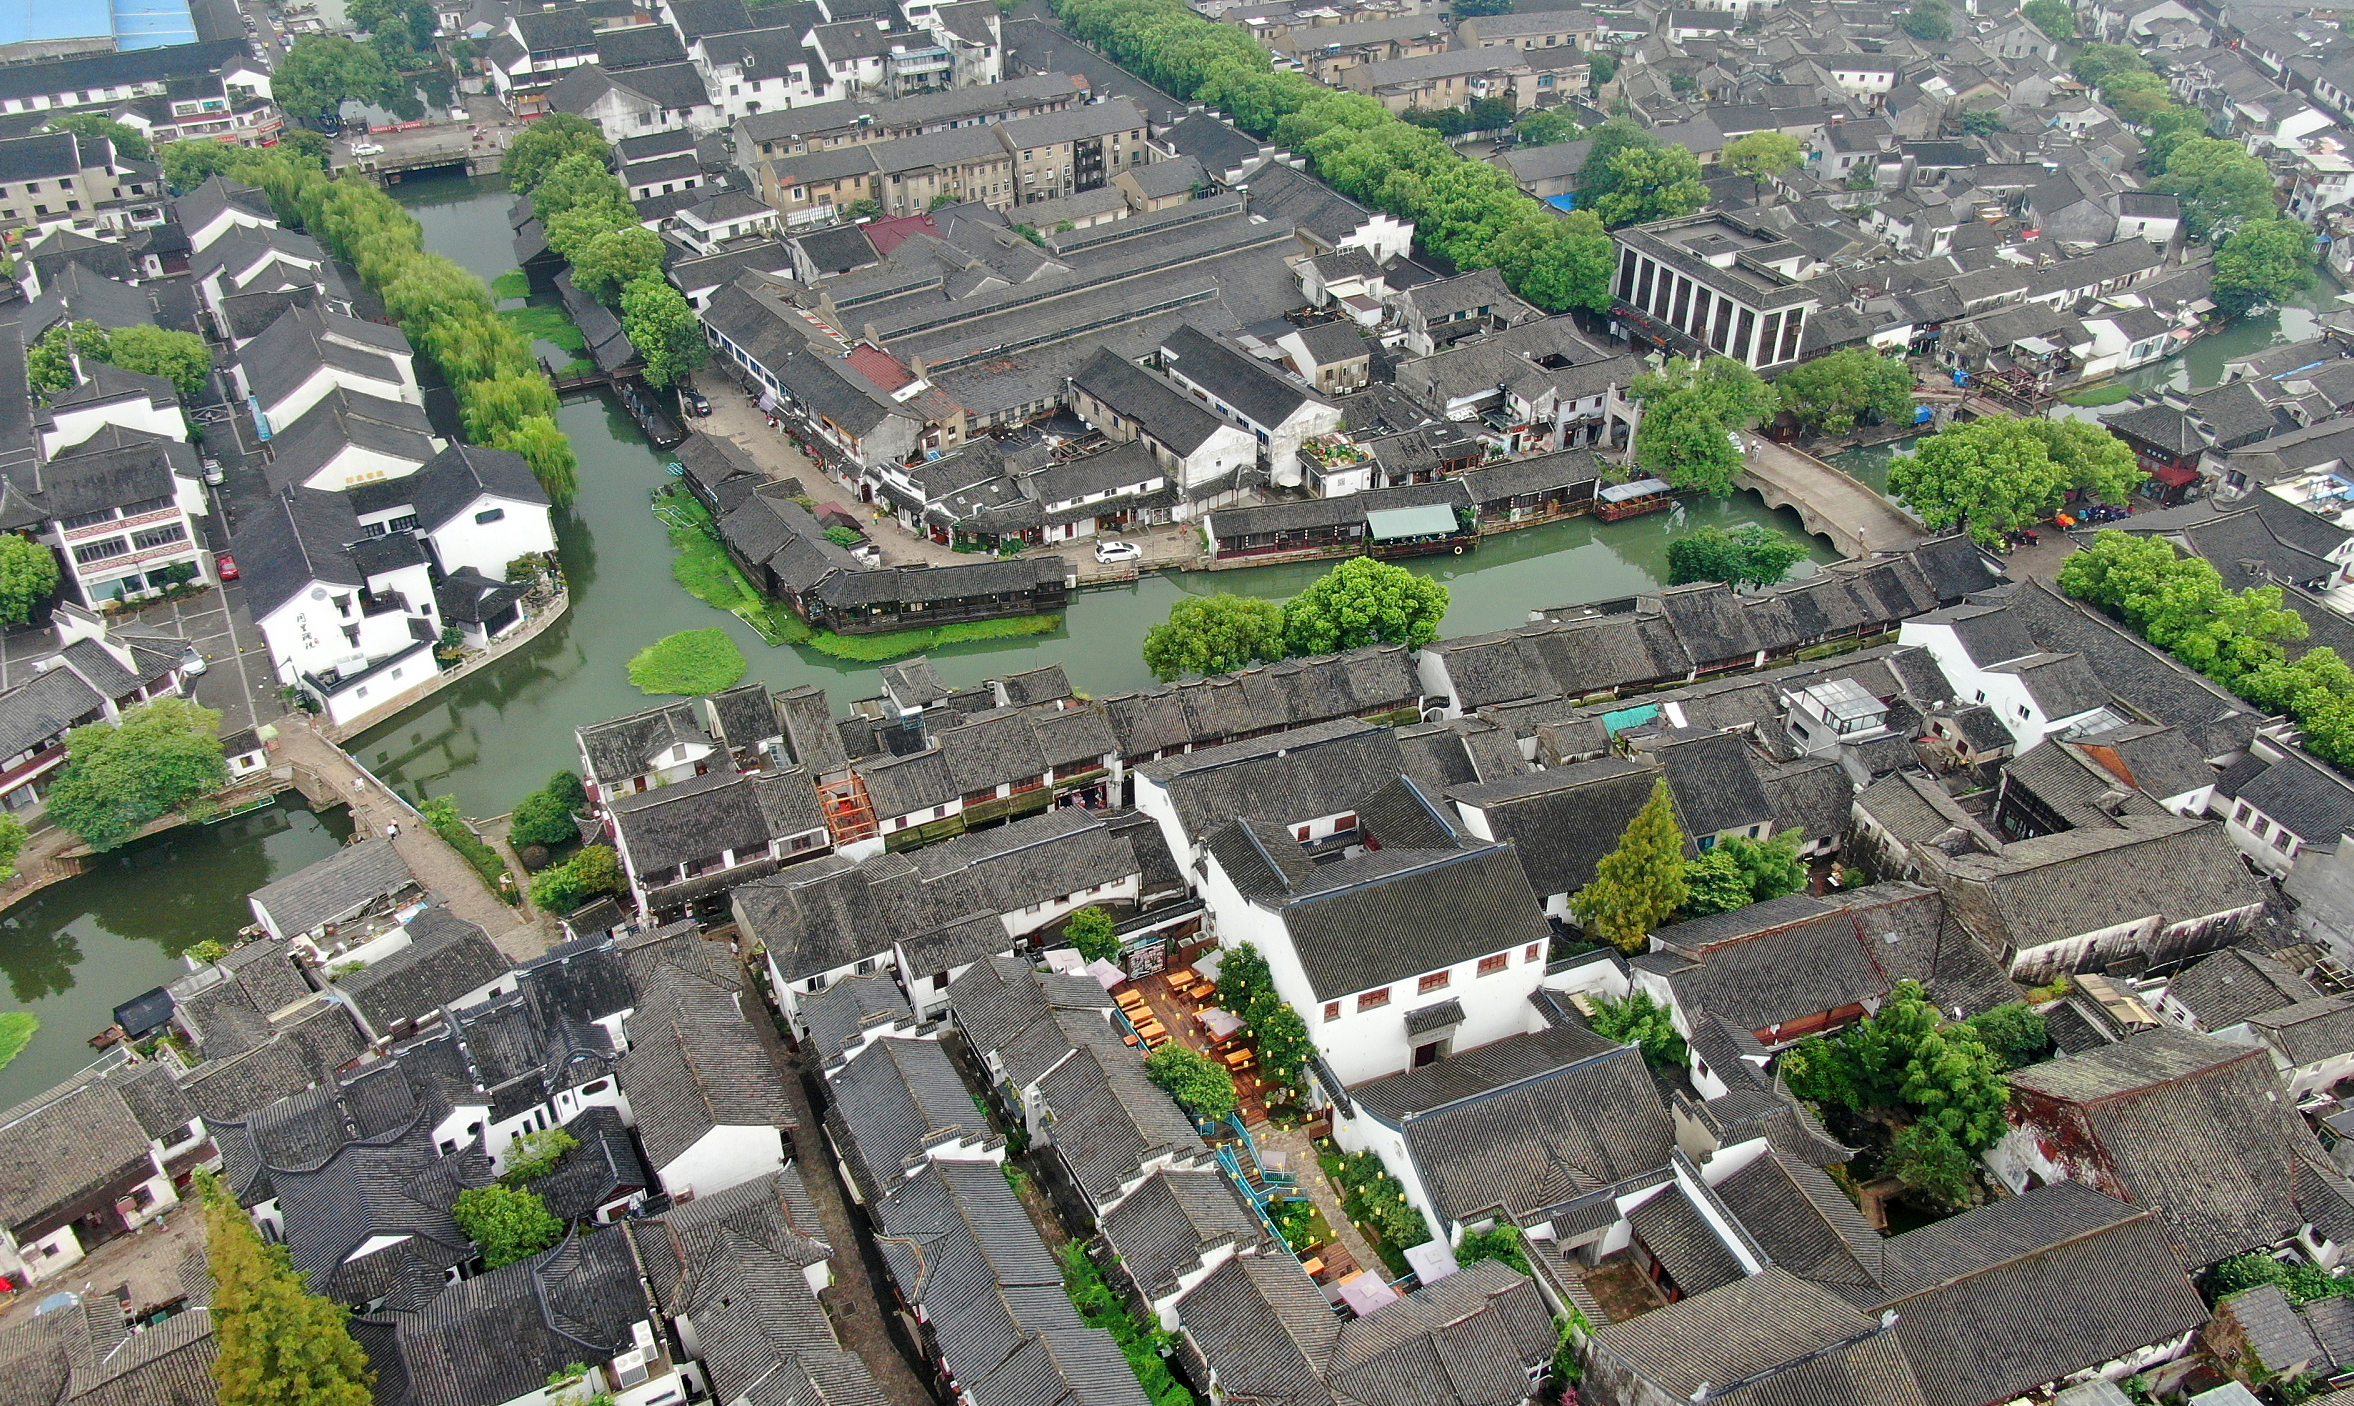 Tongli Ancient Town, a classic water town in the Yangtze River's lower reaches